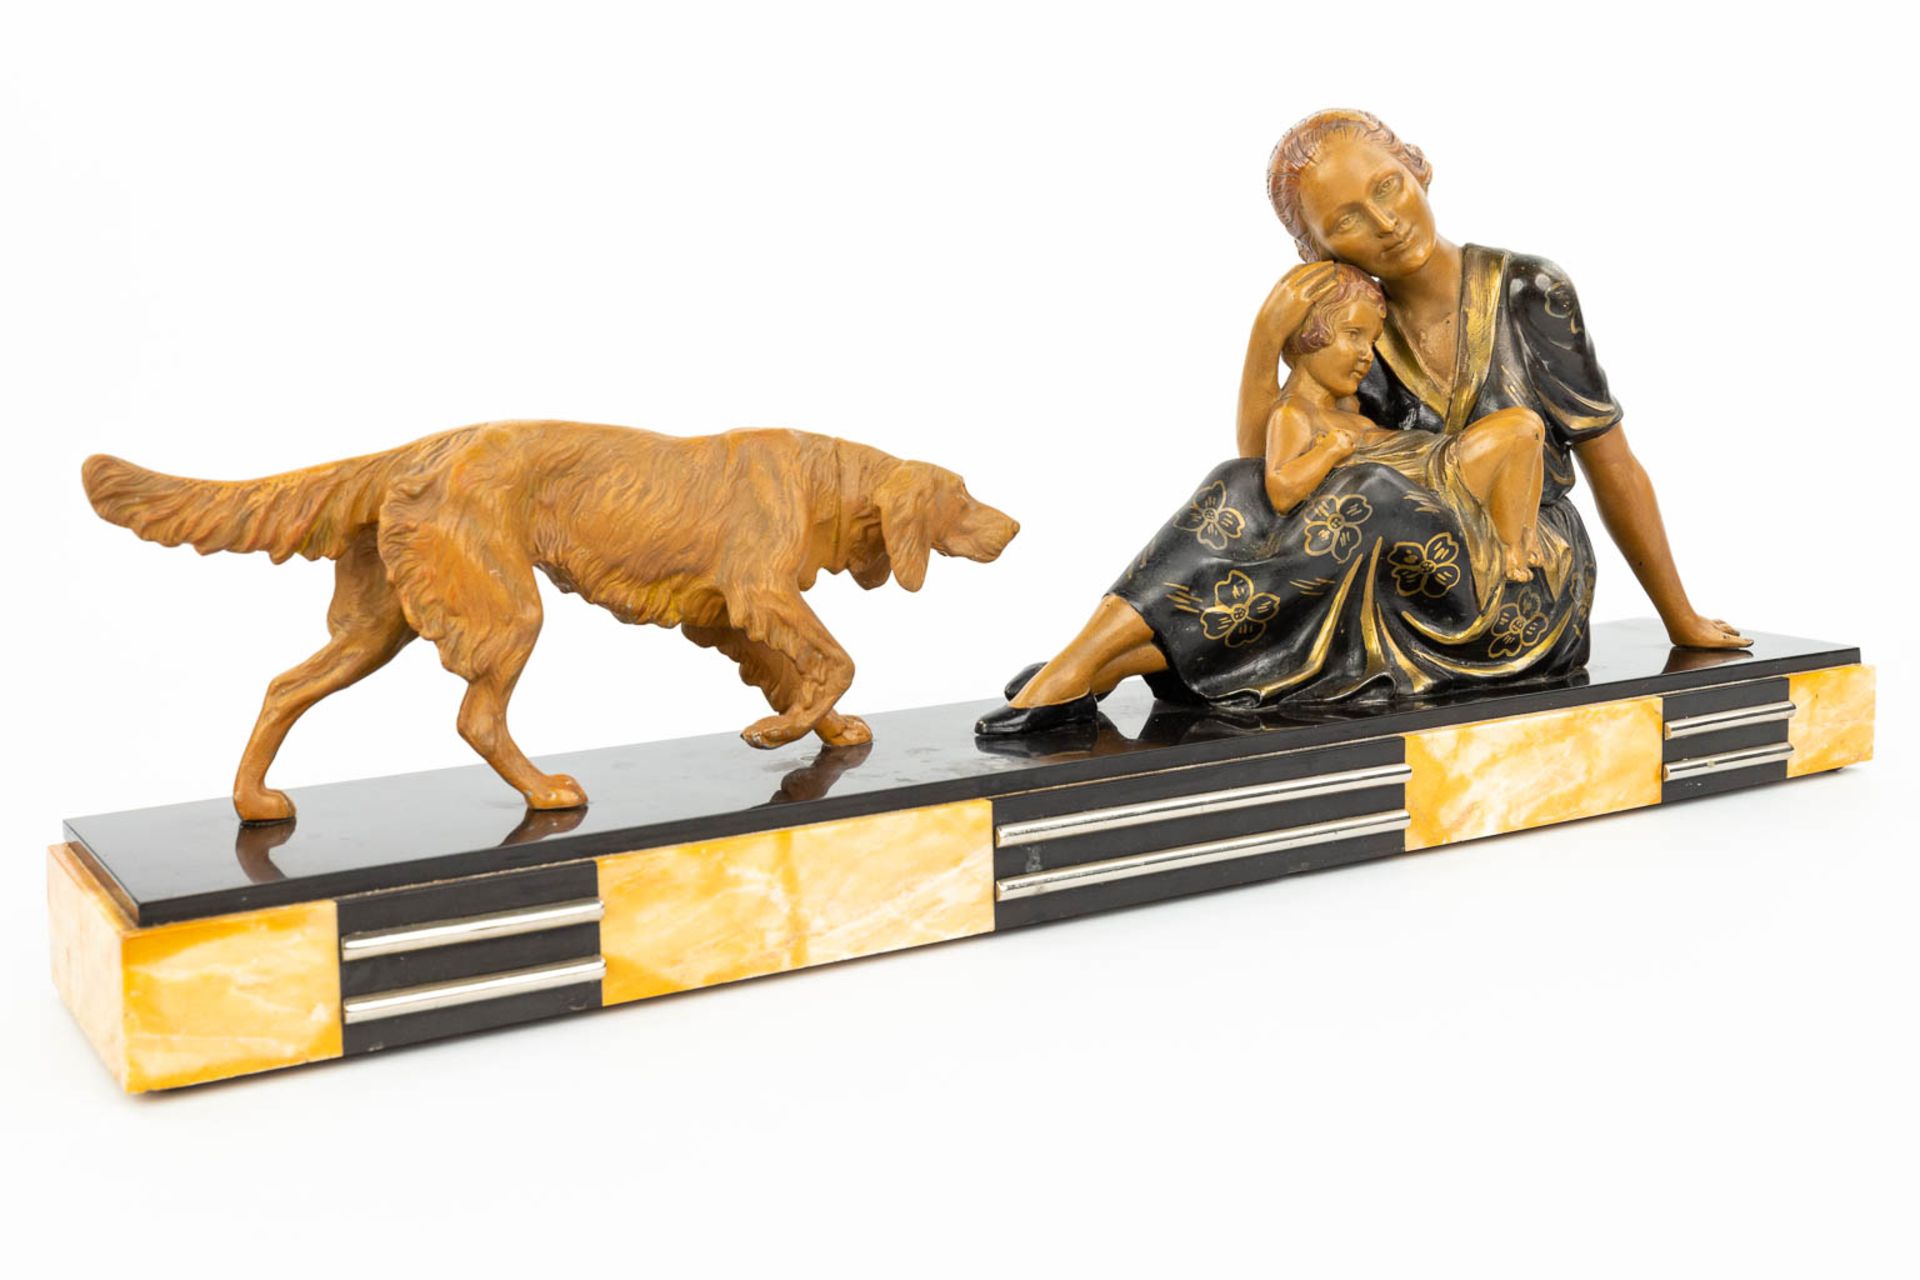 An art deco style statue of a woman with child and her dog, made of spelter and mounted on a marble - Image 3 of 12